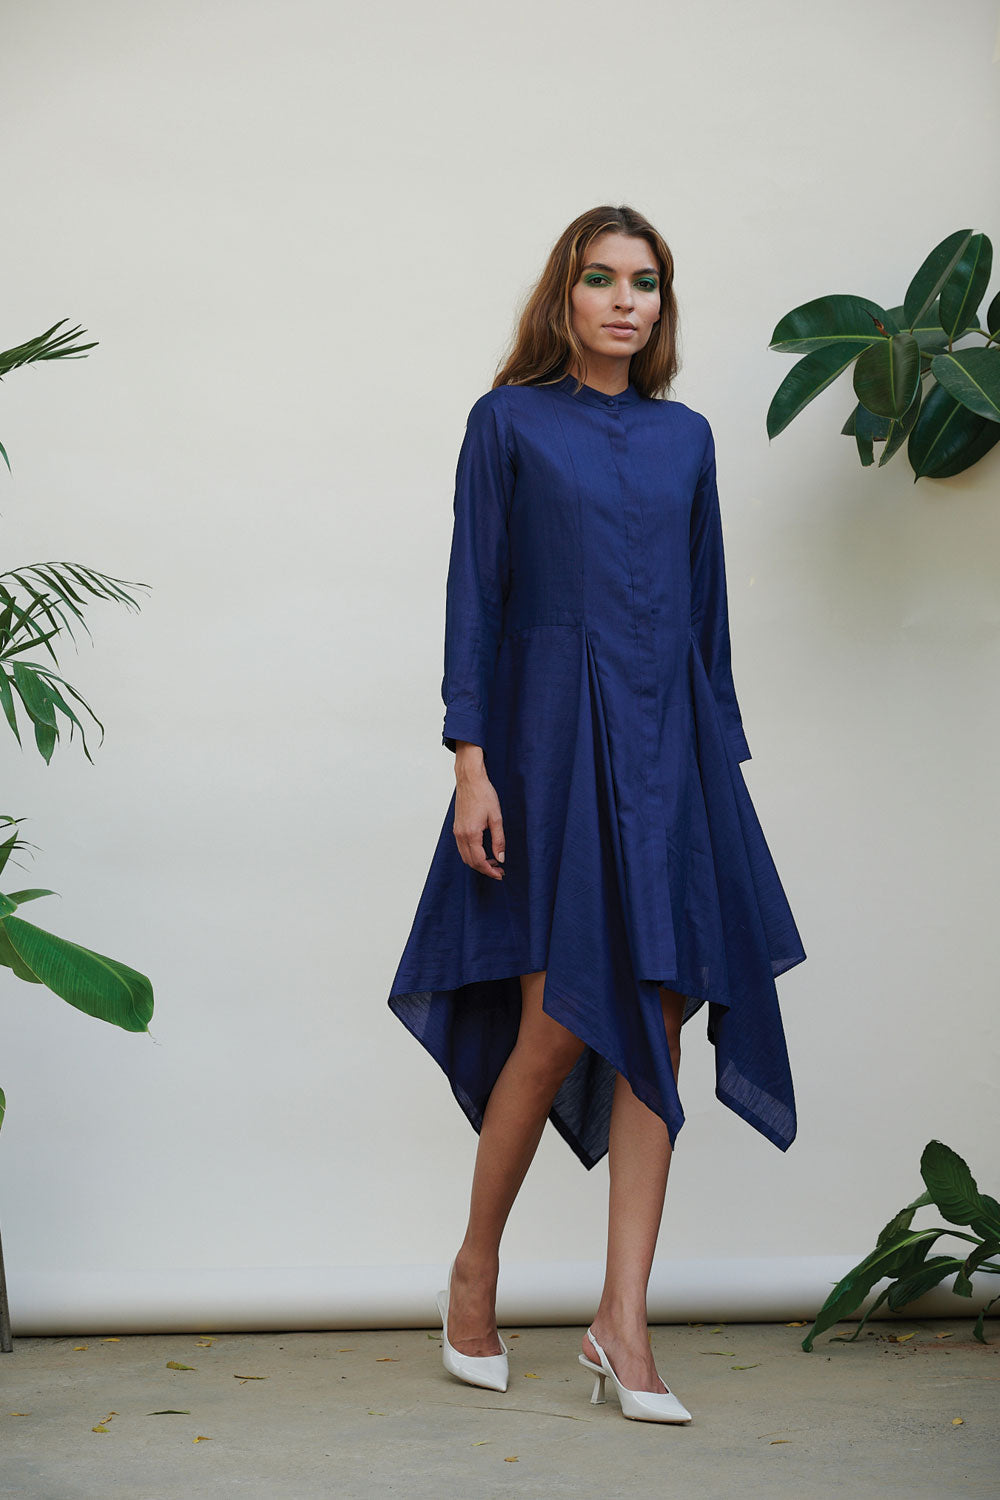 Blue Solid Midi Dress at Kamakhyaa by Kanelle. This item is Best Selling, Blue, Bold is beautiful, Casual Wear, Cotton Viscose, For Anniversary, July Sale, Midi Dresses, Natural with azo dyes, Regular Fit, Shirt Dresses, Solids, Womenswear